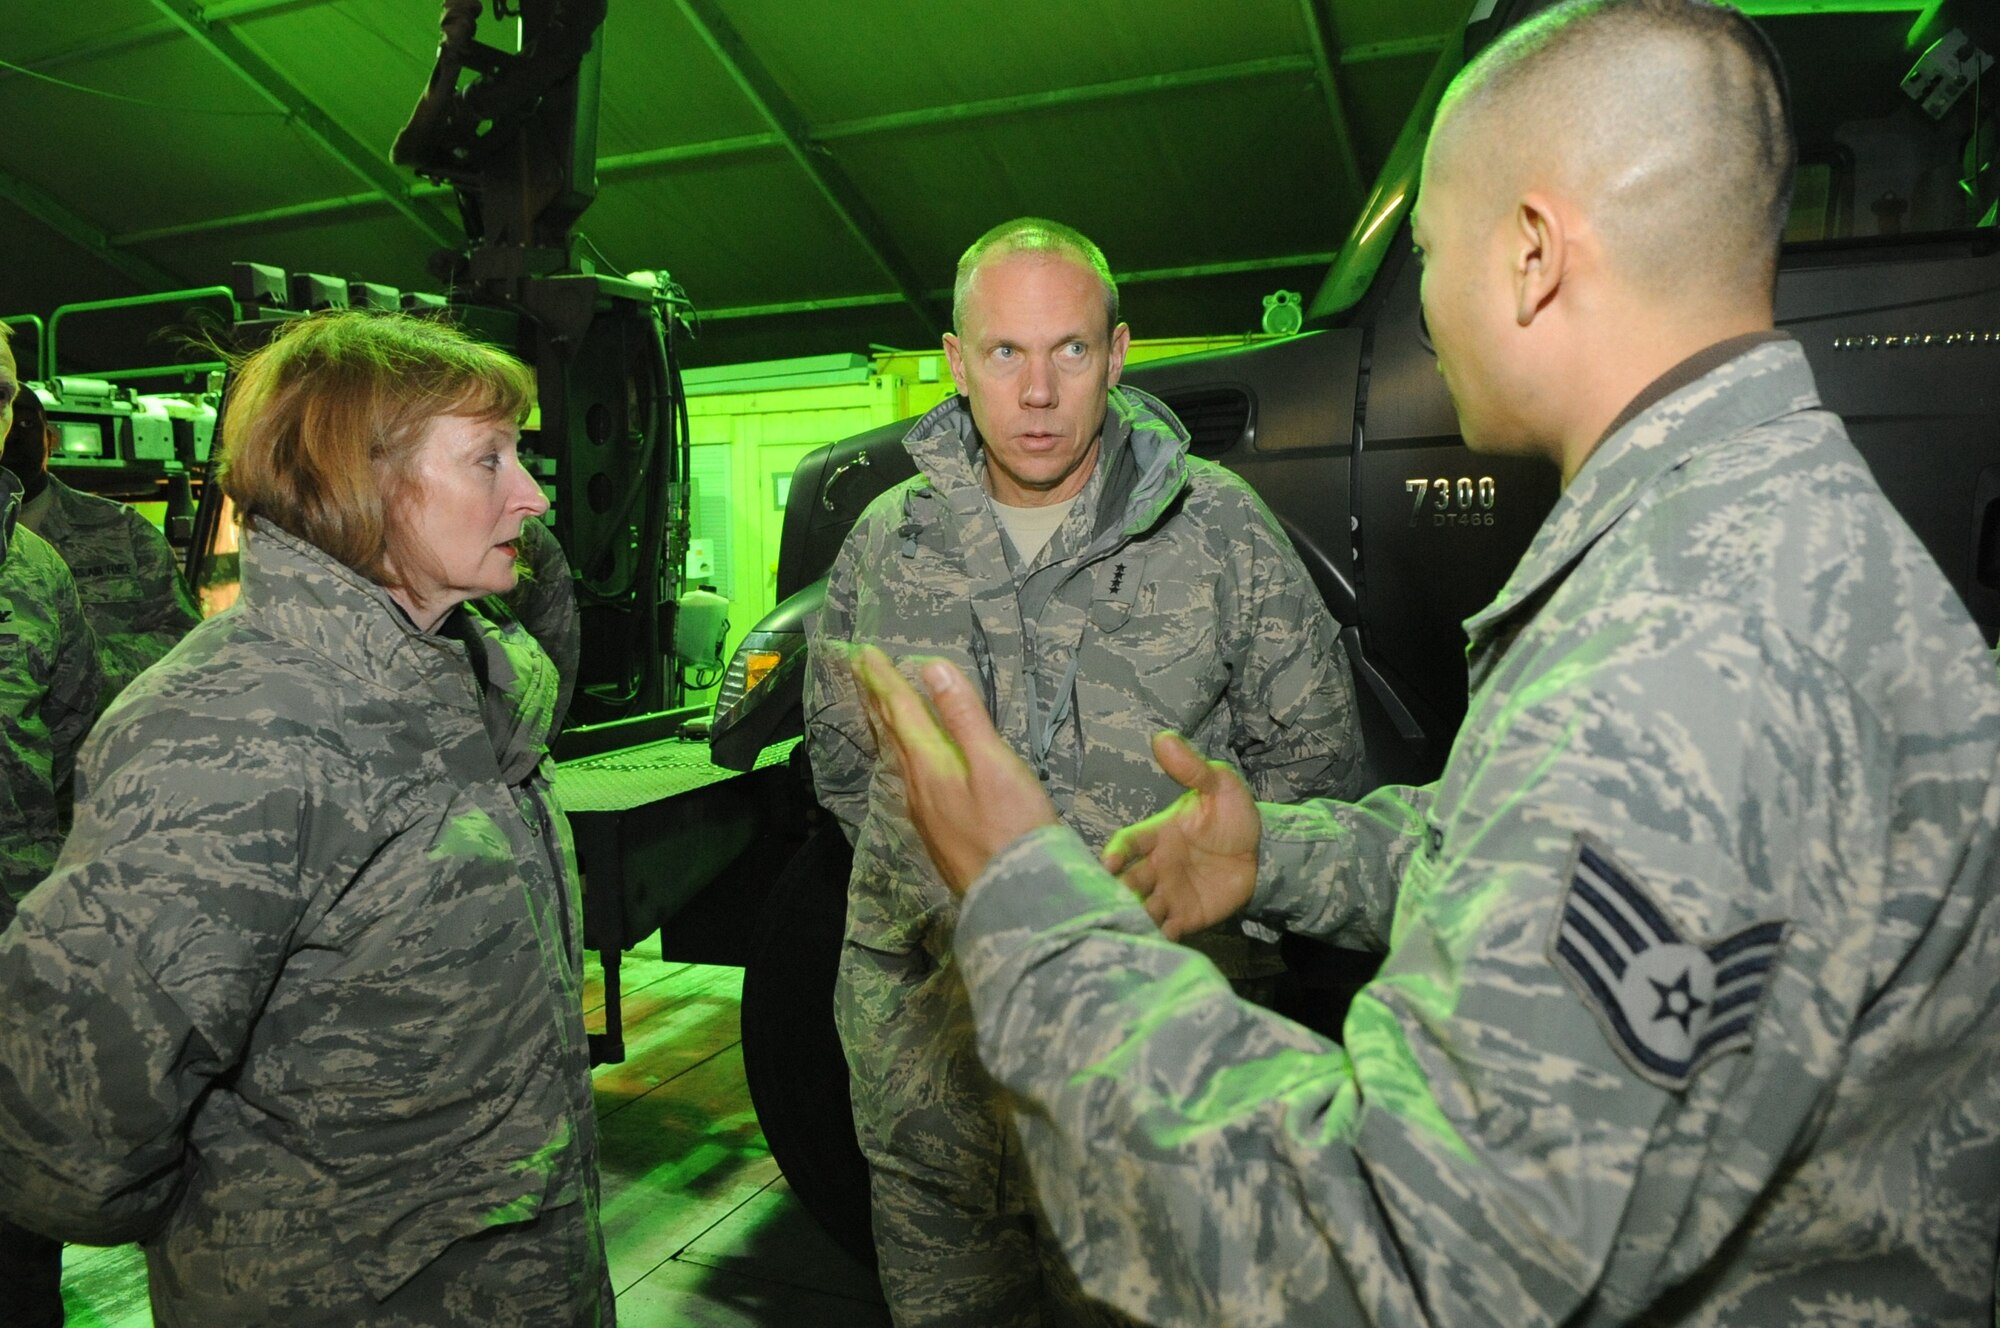 Gen. Donald Hoffman, Commander of Air Force Materiel Command, and Maj. Gen. Polly Peyer Commander Warner Robins Air Logistics Center, Air Force Material Command, Robins Air Force Base, Ga., speak with Staff Sgt. Allan Lee about the role of vehicle maintenance at the Transit Center at Manas, Kyrgyzstan, Feb. 7, 2010. General Hoffman and General Peyer visited the Transit Center as part of a trip through the U.S. Central Command?s area of responsibility to acquire feedback directly from the warfighter about the test and sustainment support AFMC is contributing to the fight.  Sergeant Lee works in the 376th Expeditionary Logistics Readiness Squadron Vehicle Management section. (U.S. Air Force photo/Senior Airman Nichelle Anderson/released)